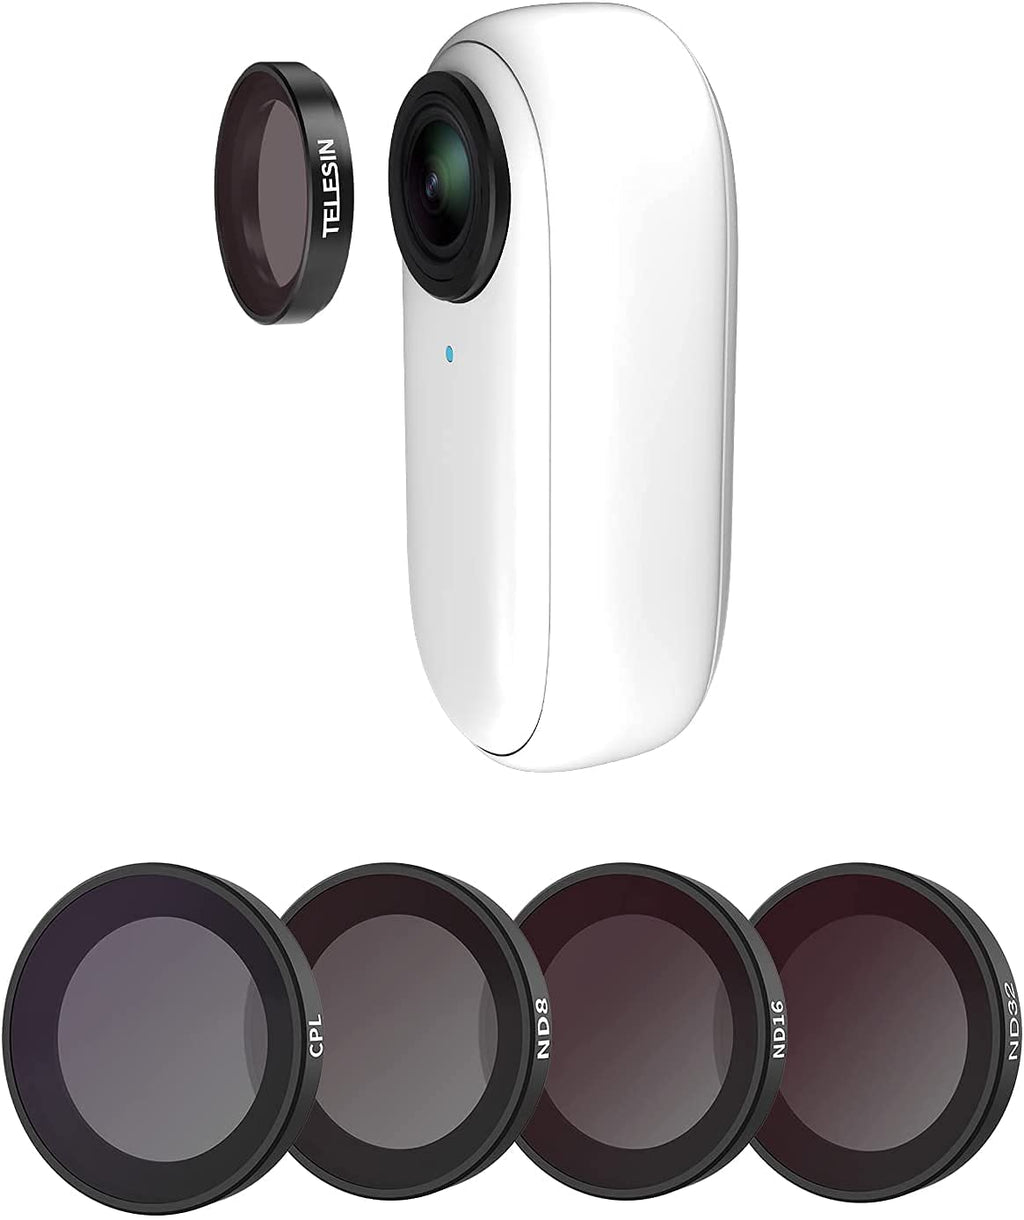 TELESIN 4-Pack Lens Filter ND8 ND16 ND32 CPL for Insta 360 Go2 Camera, Neutral Density and Polarizing Lens Filter Kit Action Camera Lens Protector Accessories